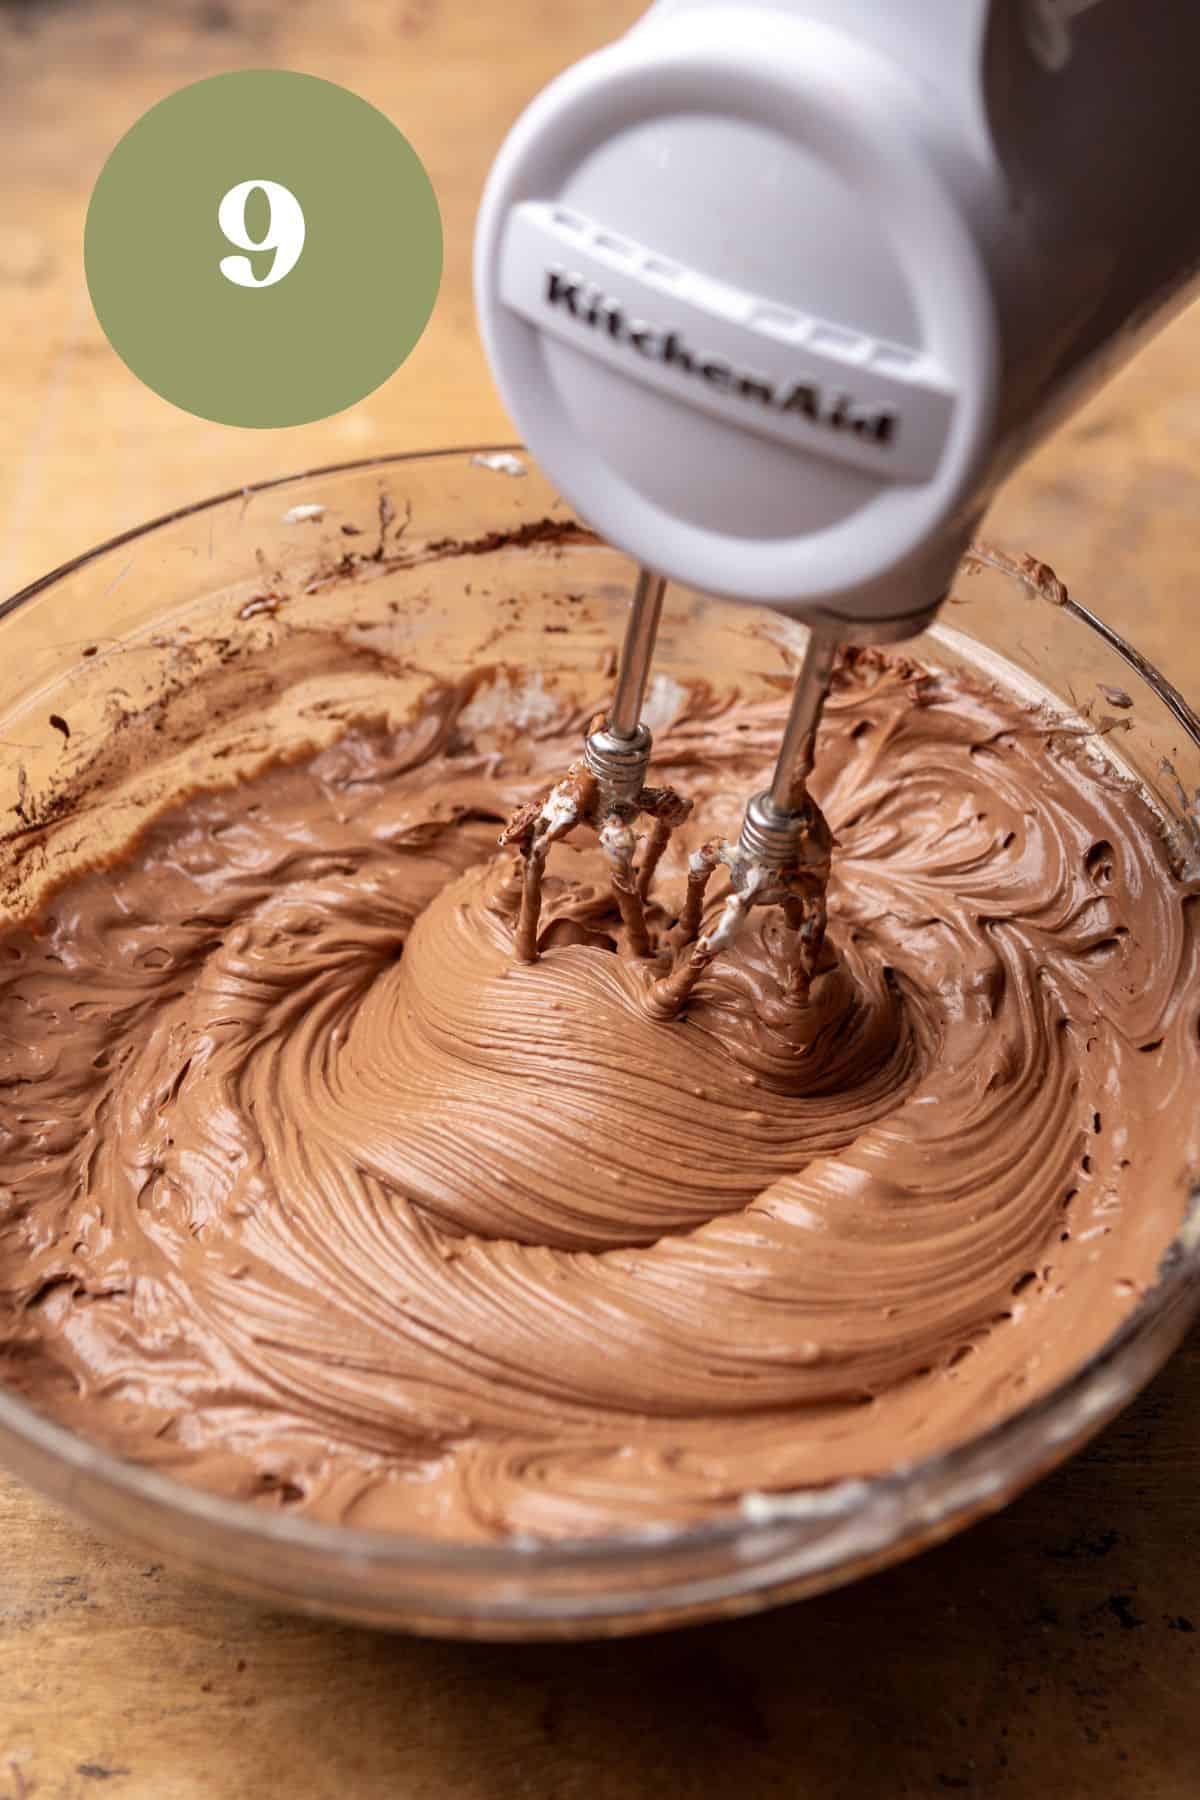 Mixing chocolate cheesecake batter in a bowl.